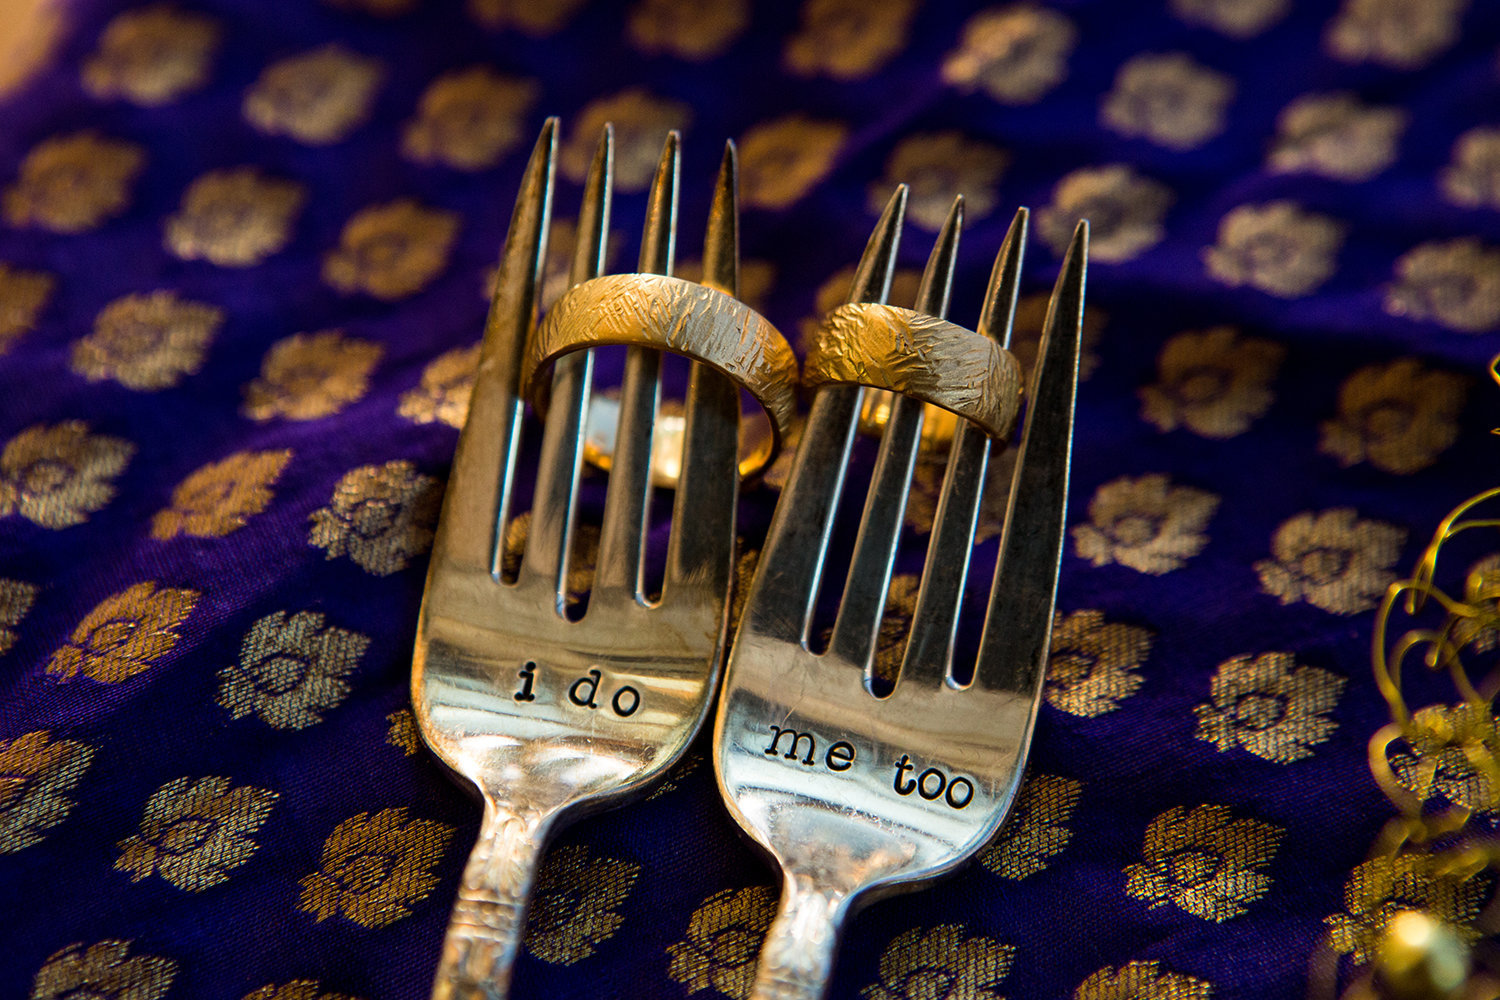 Creative ring detail photo using forks at an Indian wedding